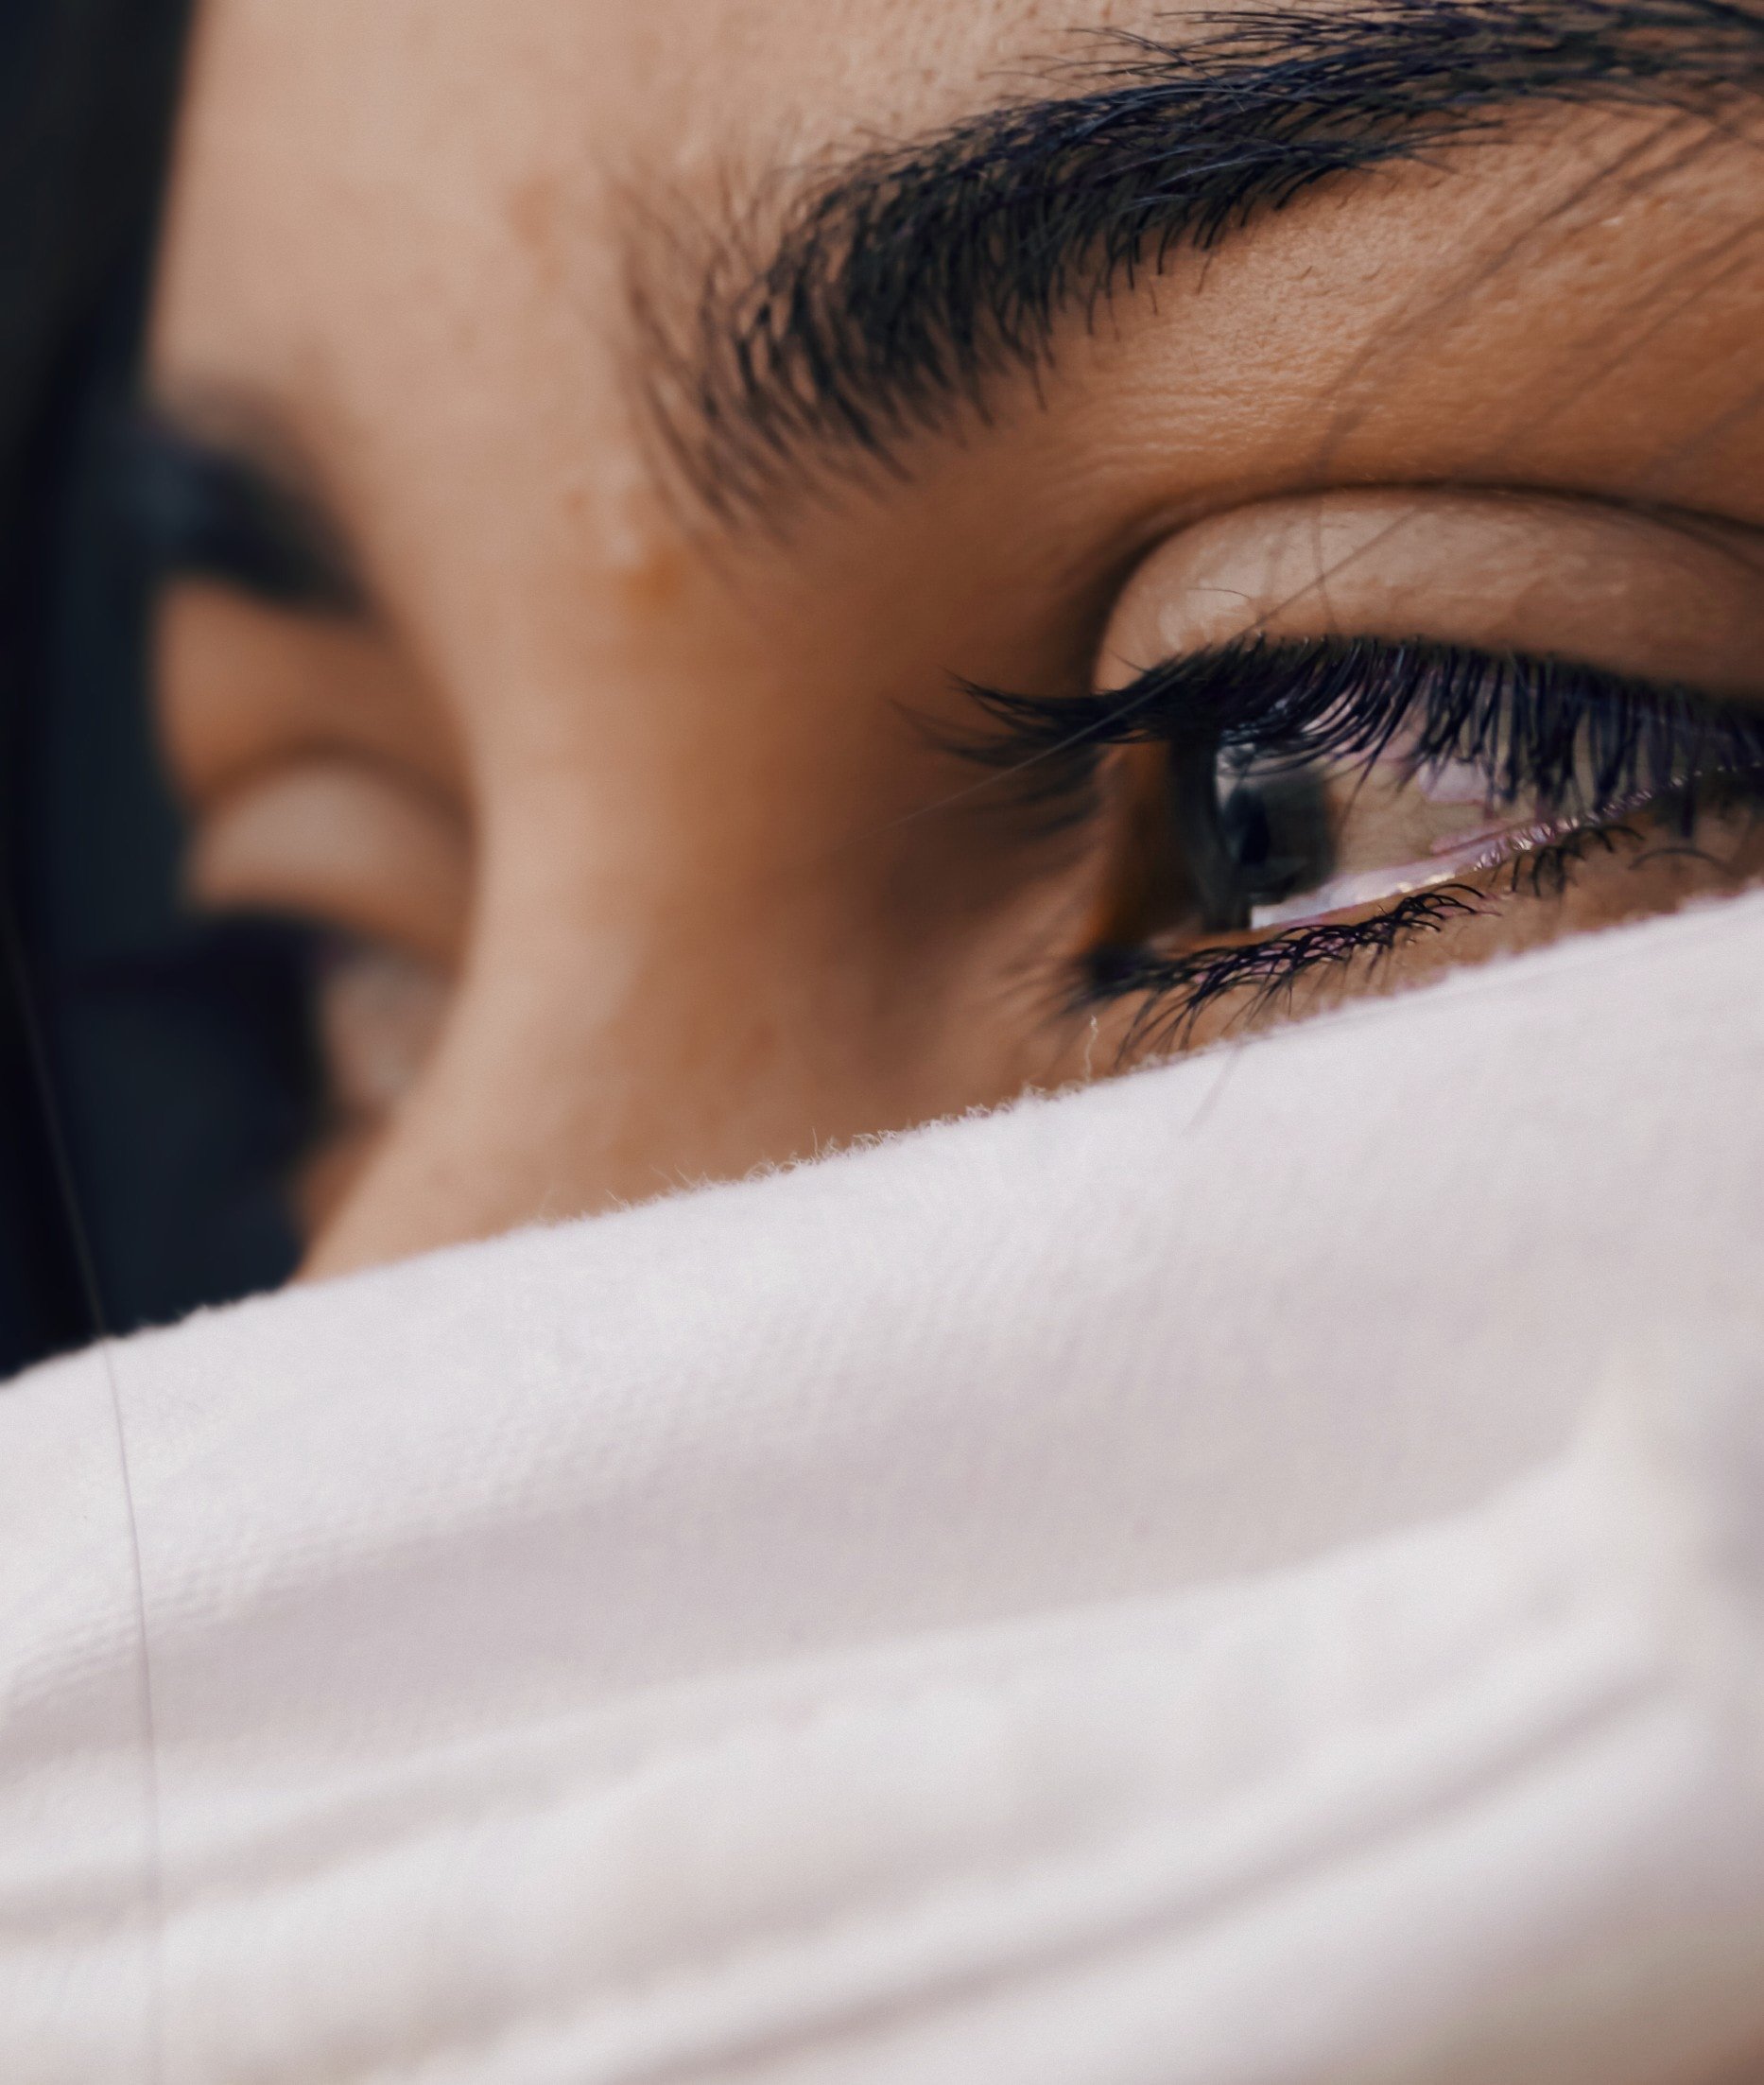 A woman with tears in her eyes | Source: Unsplash.com